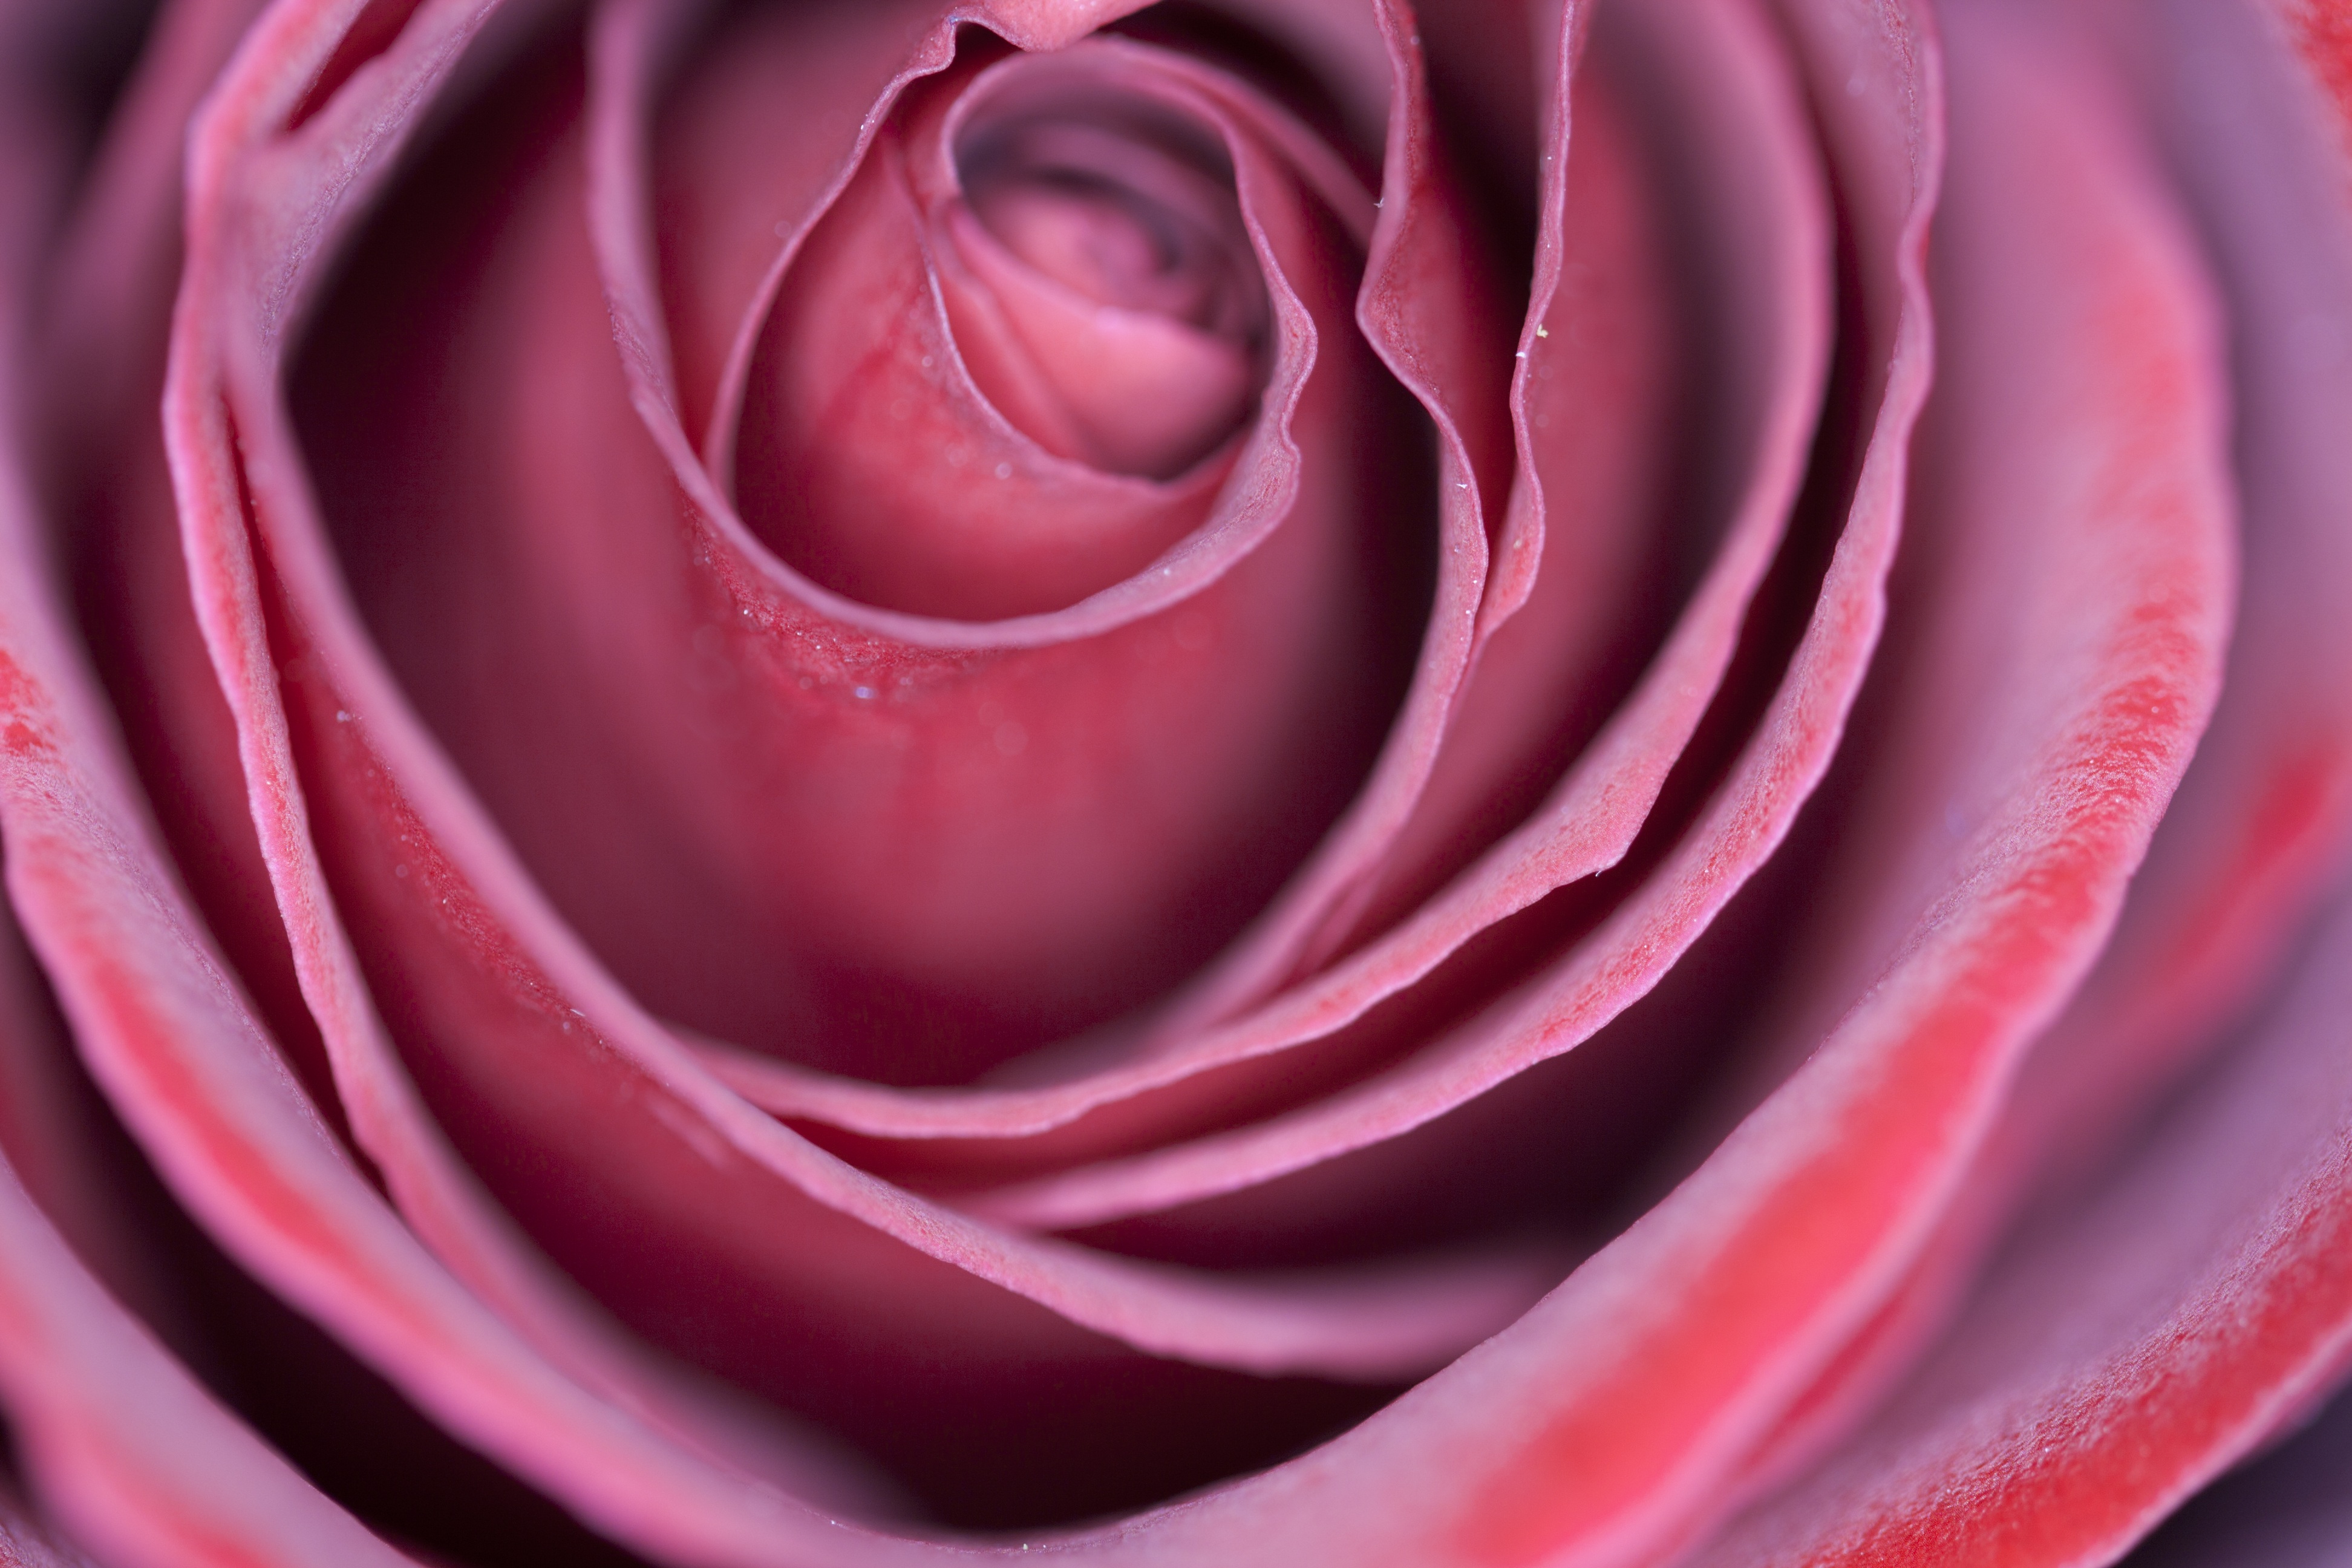 64554 Screensavers and Wallpapers Rose for phone. Download macro, rose flower, rose, petals, bud pictures for free